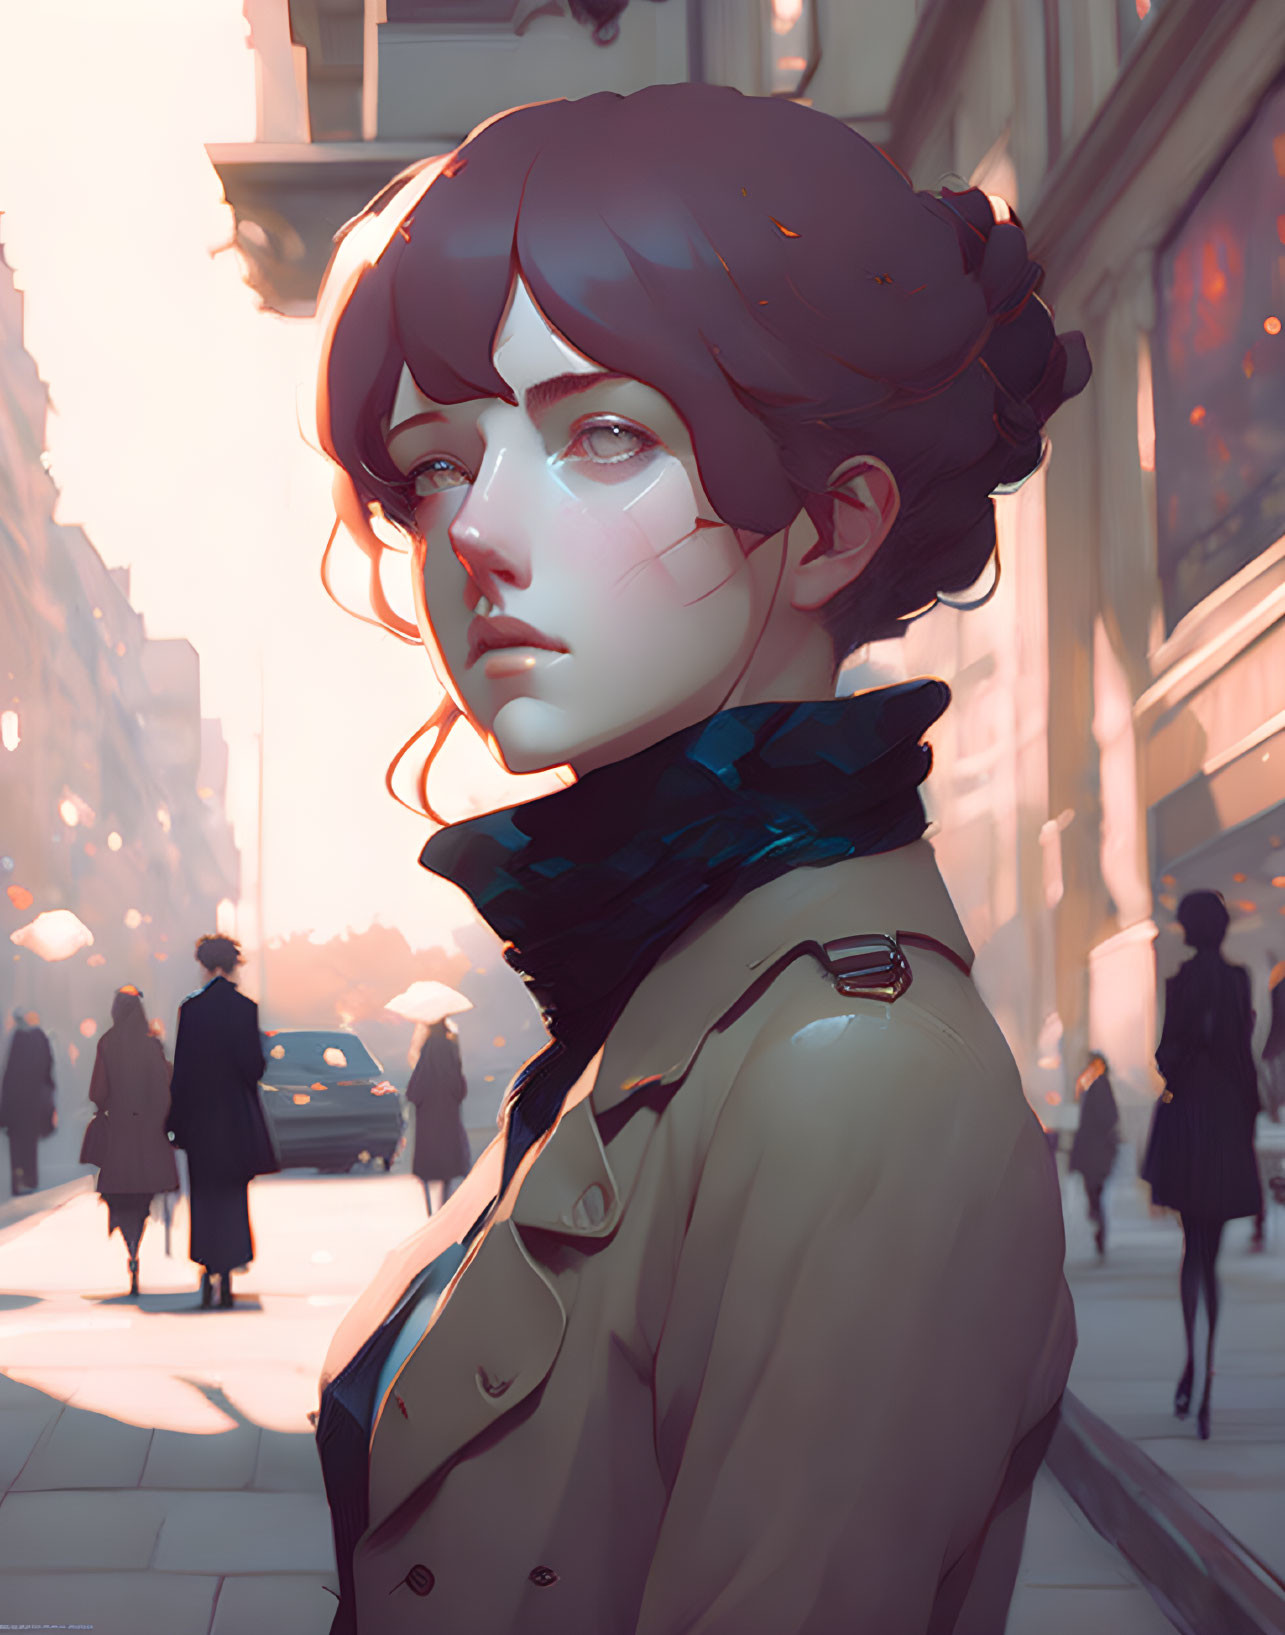 Stylized digital artwork of young woman in cityscape at sunset